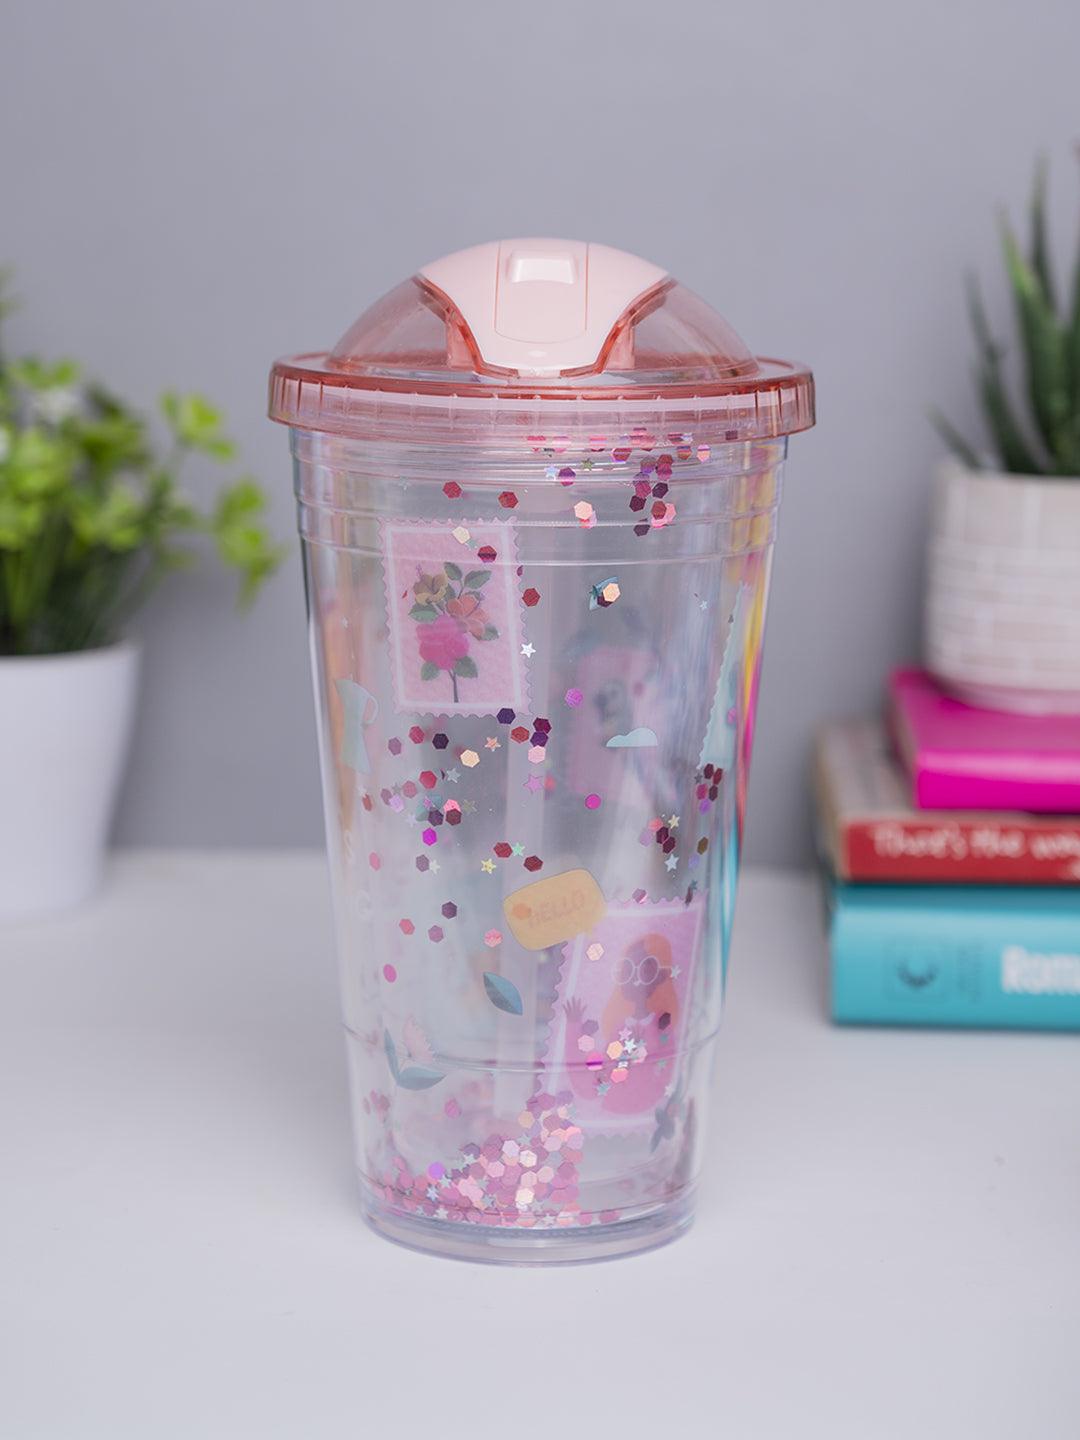 Sanrio x Miniso - Keep The Thirst Away Glass Water Bottle | Moonguland